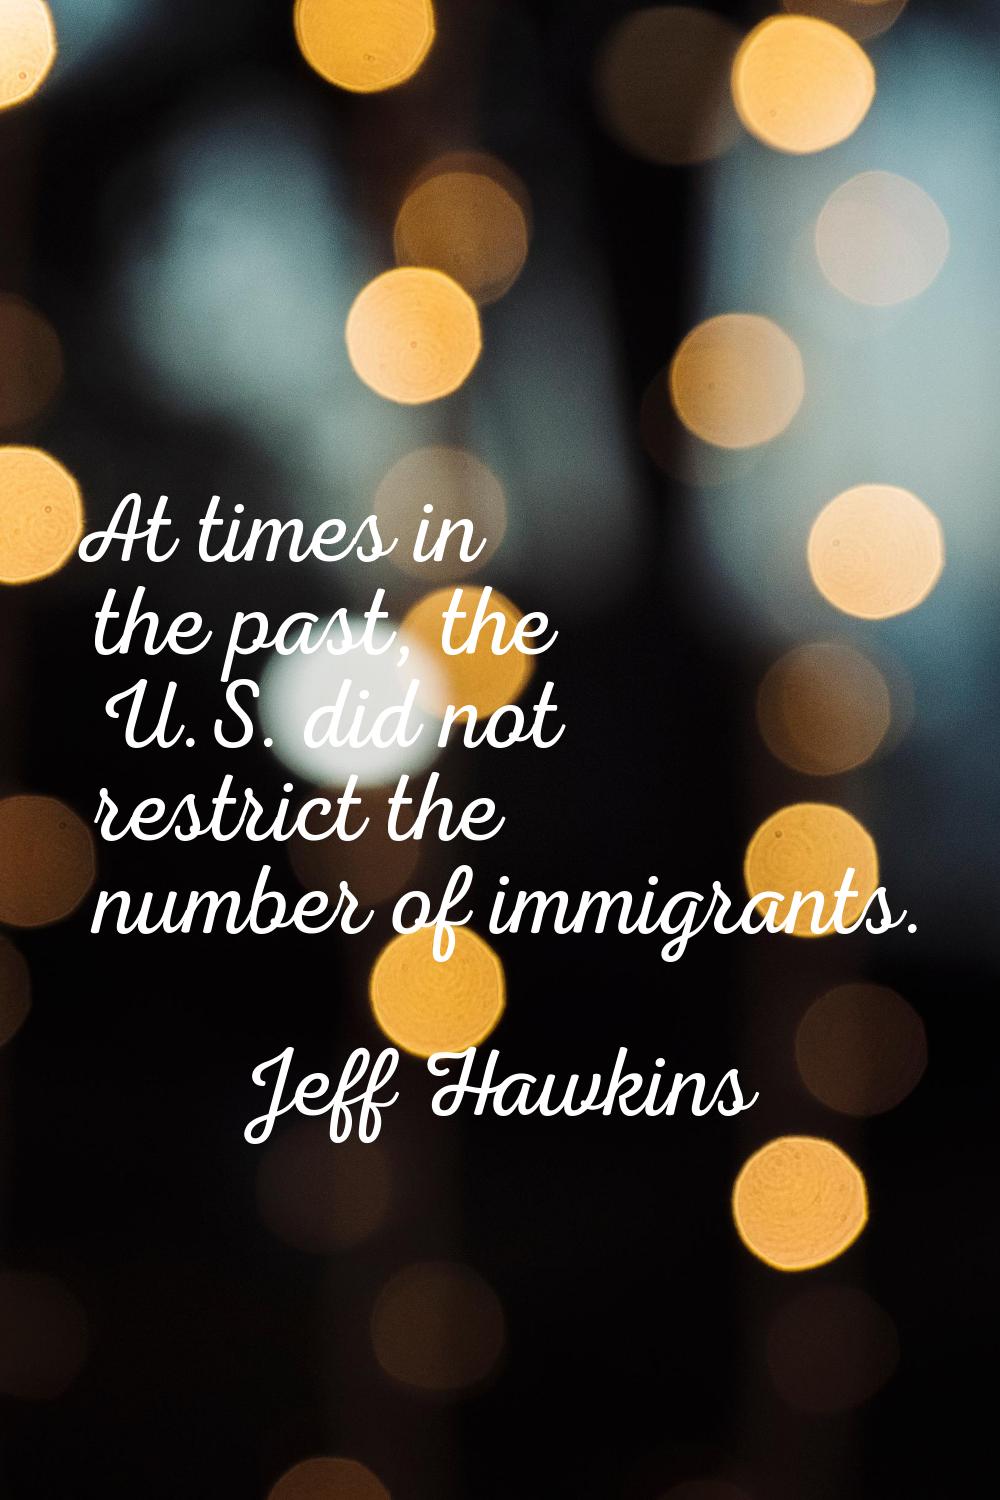 At times in the past, the U.S. did not restrict the number of immigrants.